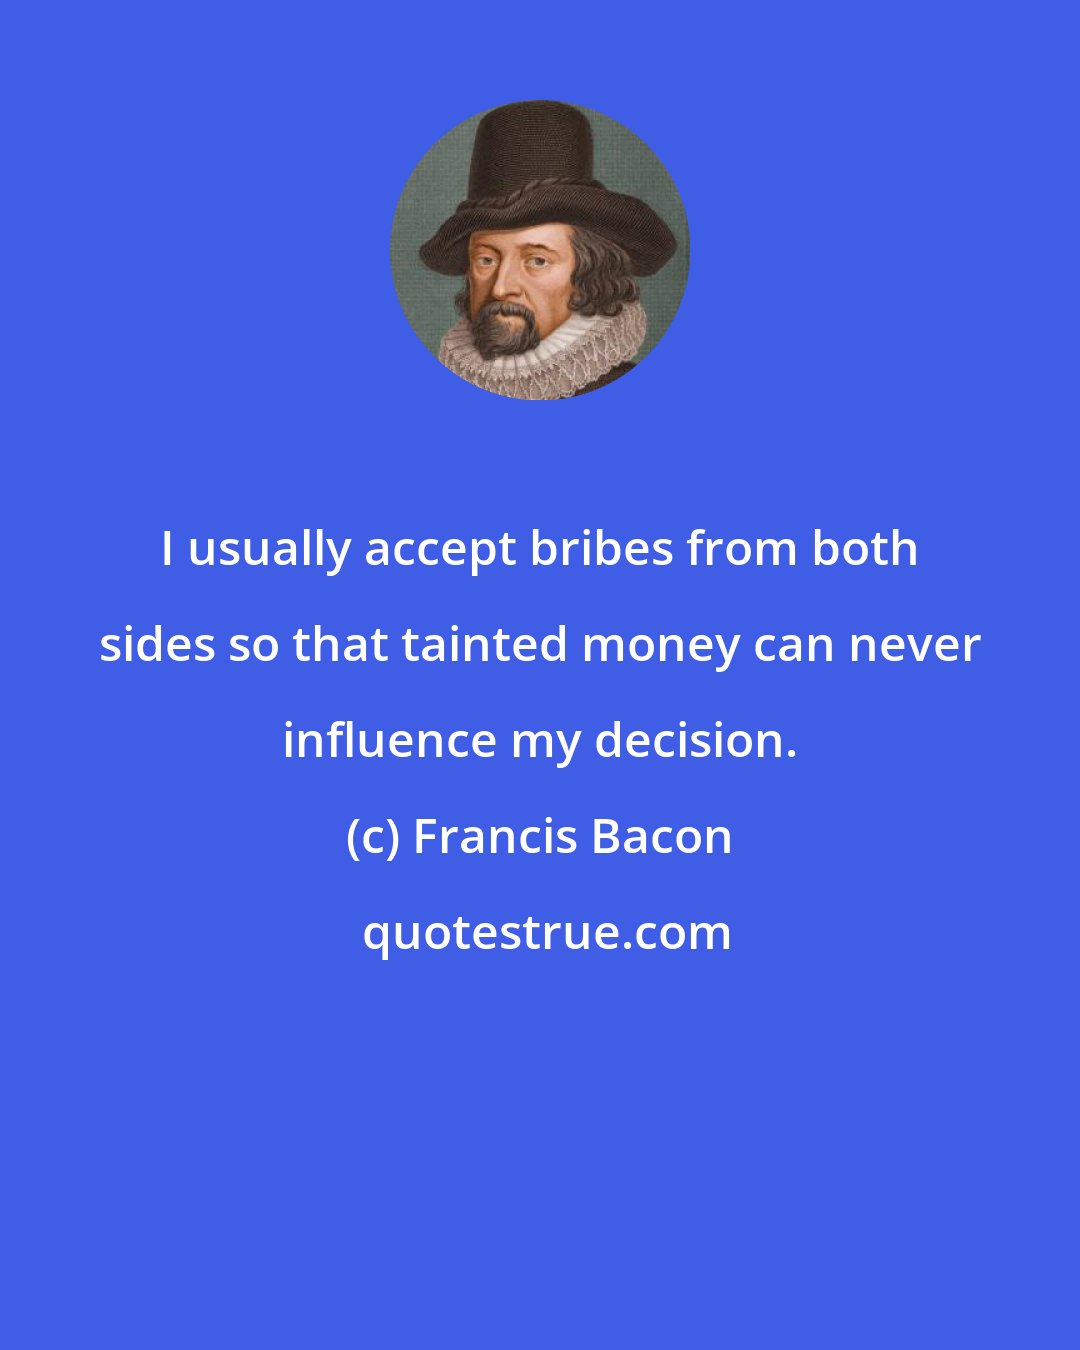 Francis Bacon: I usually accept bribes from both sides so that tainted money can never influence my decision.